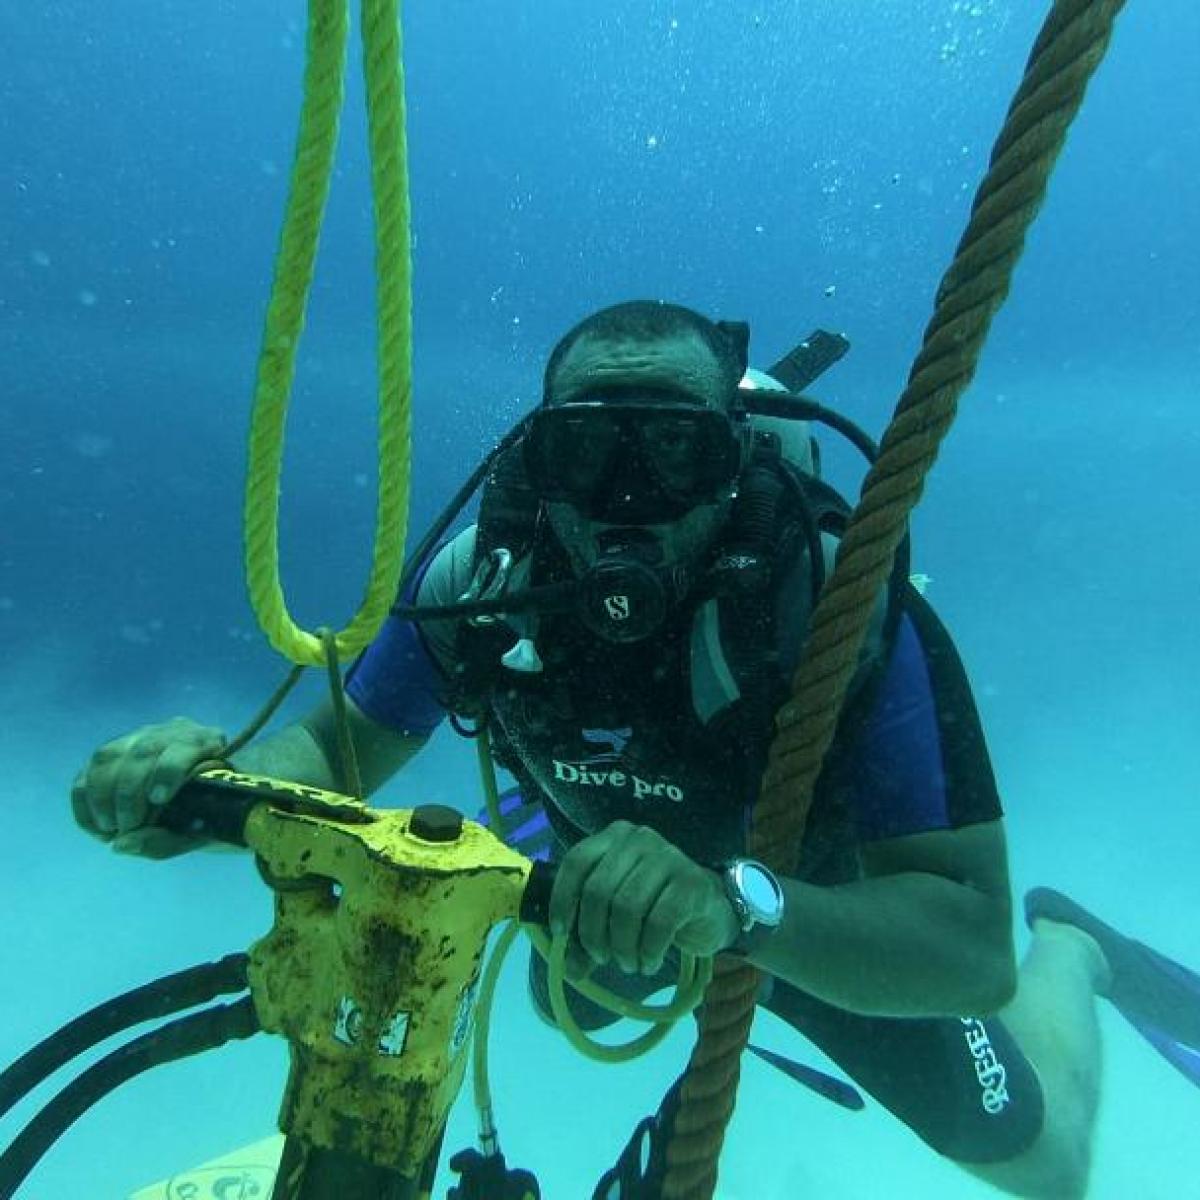 Together, USAID and HEPCA trained divers to install the moorings, and trained boat captains on seamanship, as well as environmental sensitivity and mooring buoy use. Additionally, awareness campaigns at hotels and dive centers were rolled out to ensure that divers and snorkelers respected the reefs.